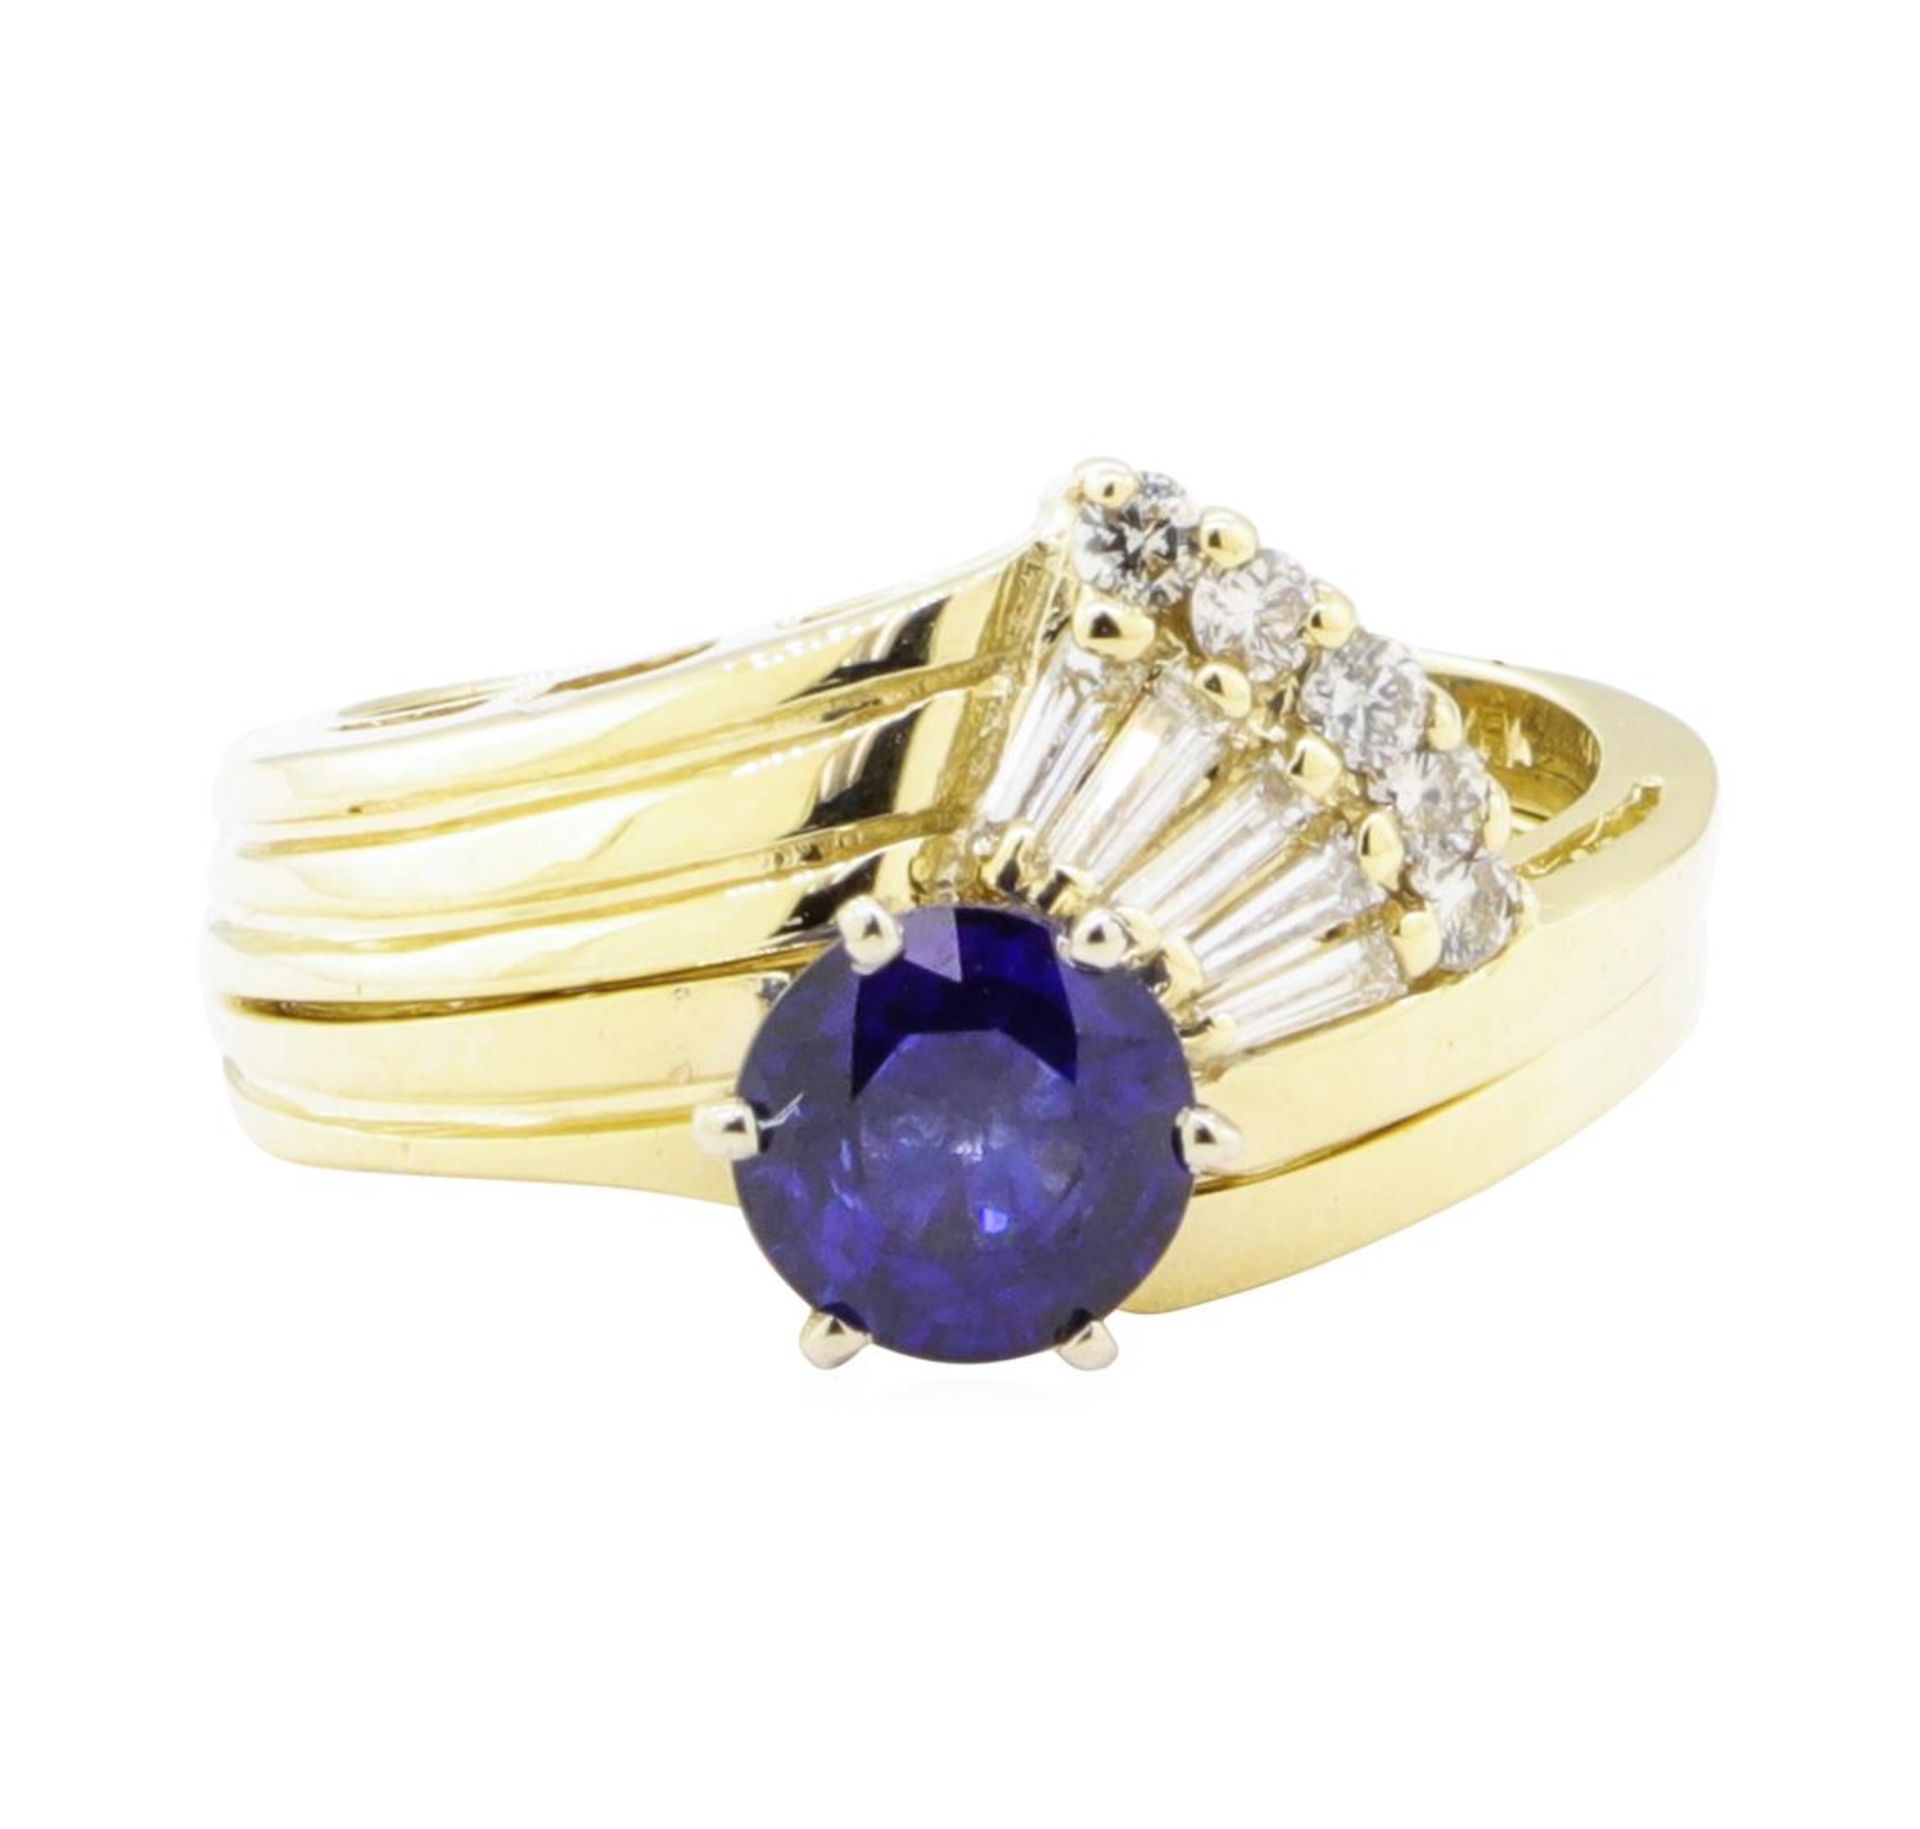 1.54ctw Sapphire and Diamond Ring - 14KT Yellow Gold - Image 2 of 4